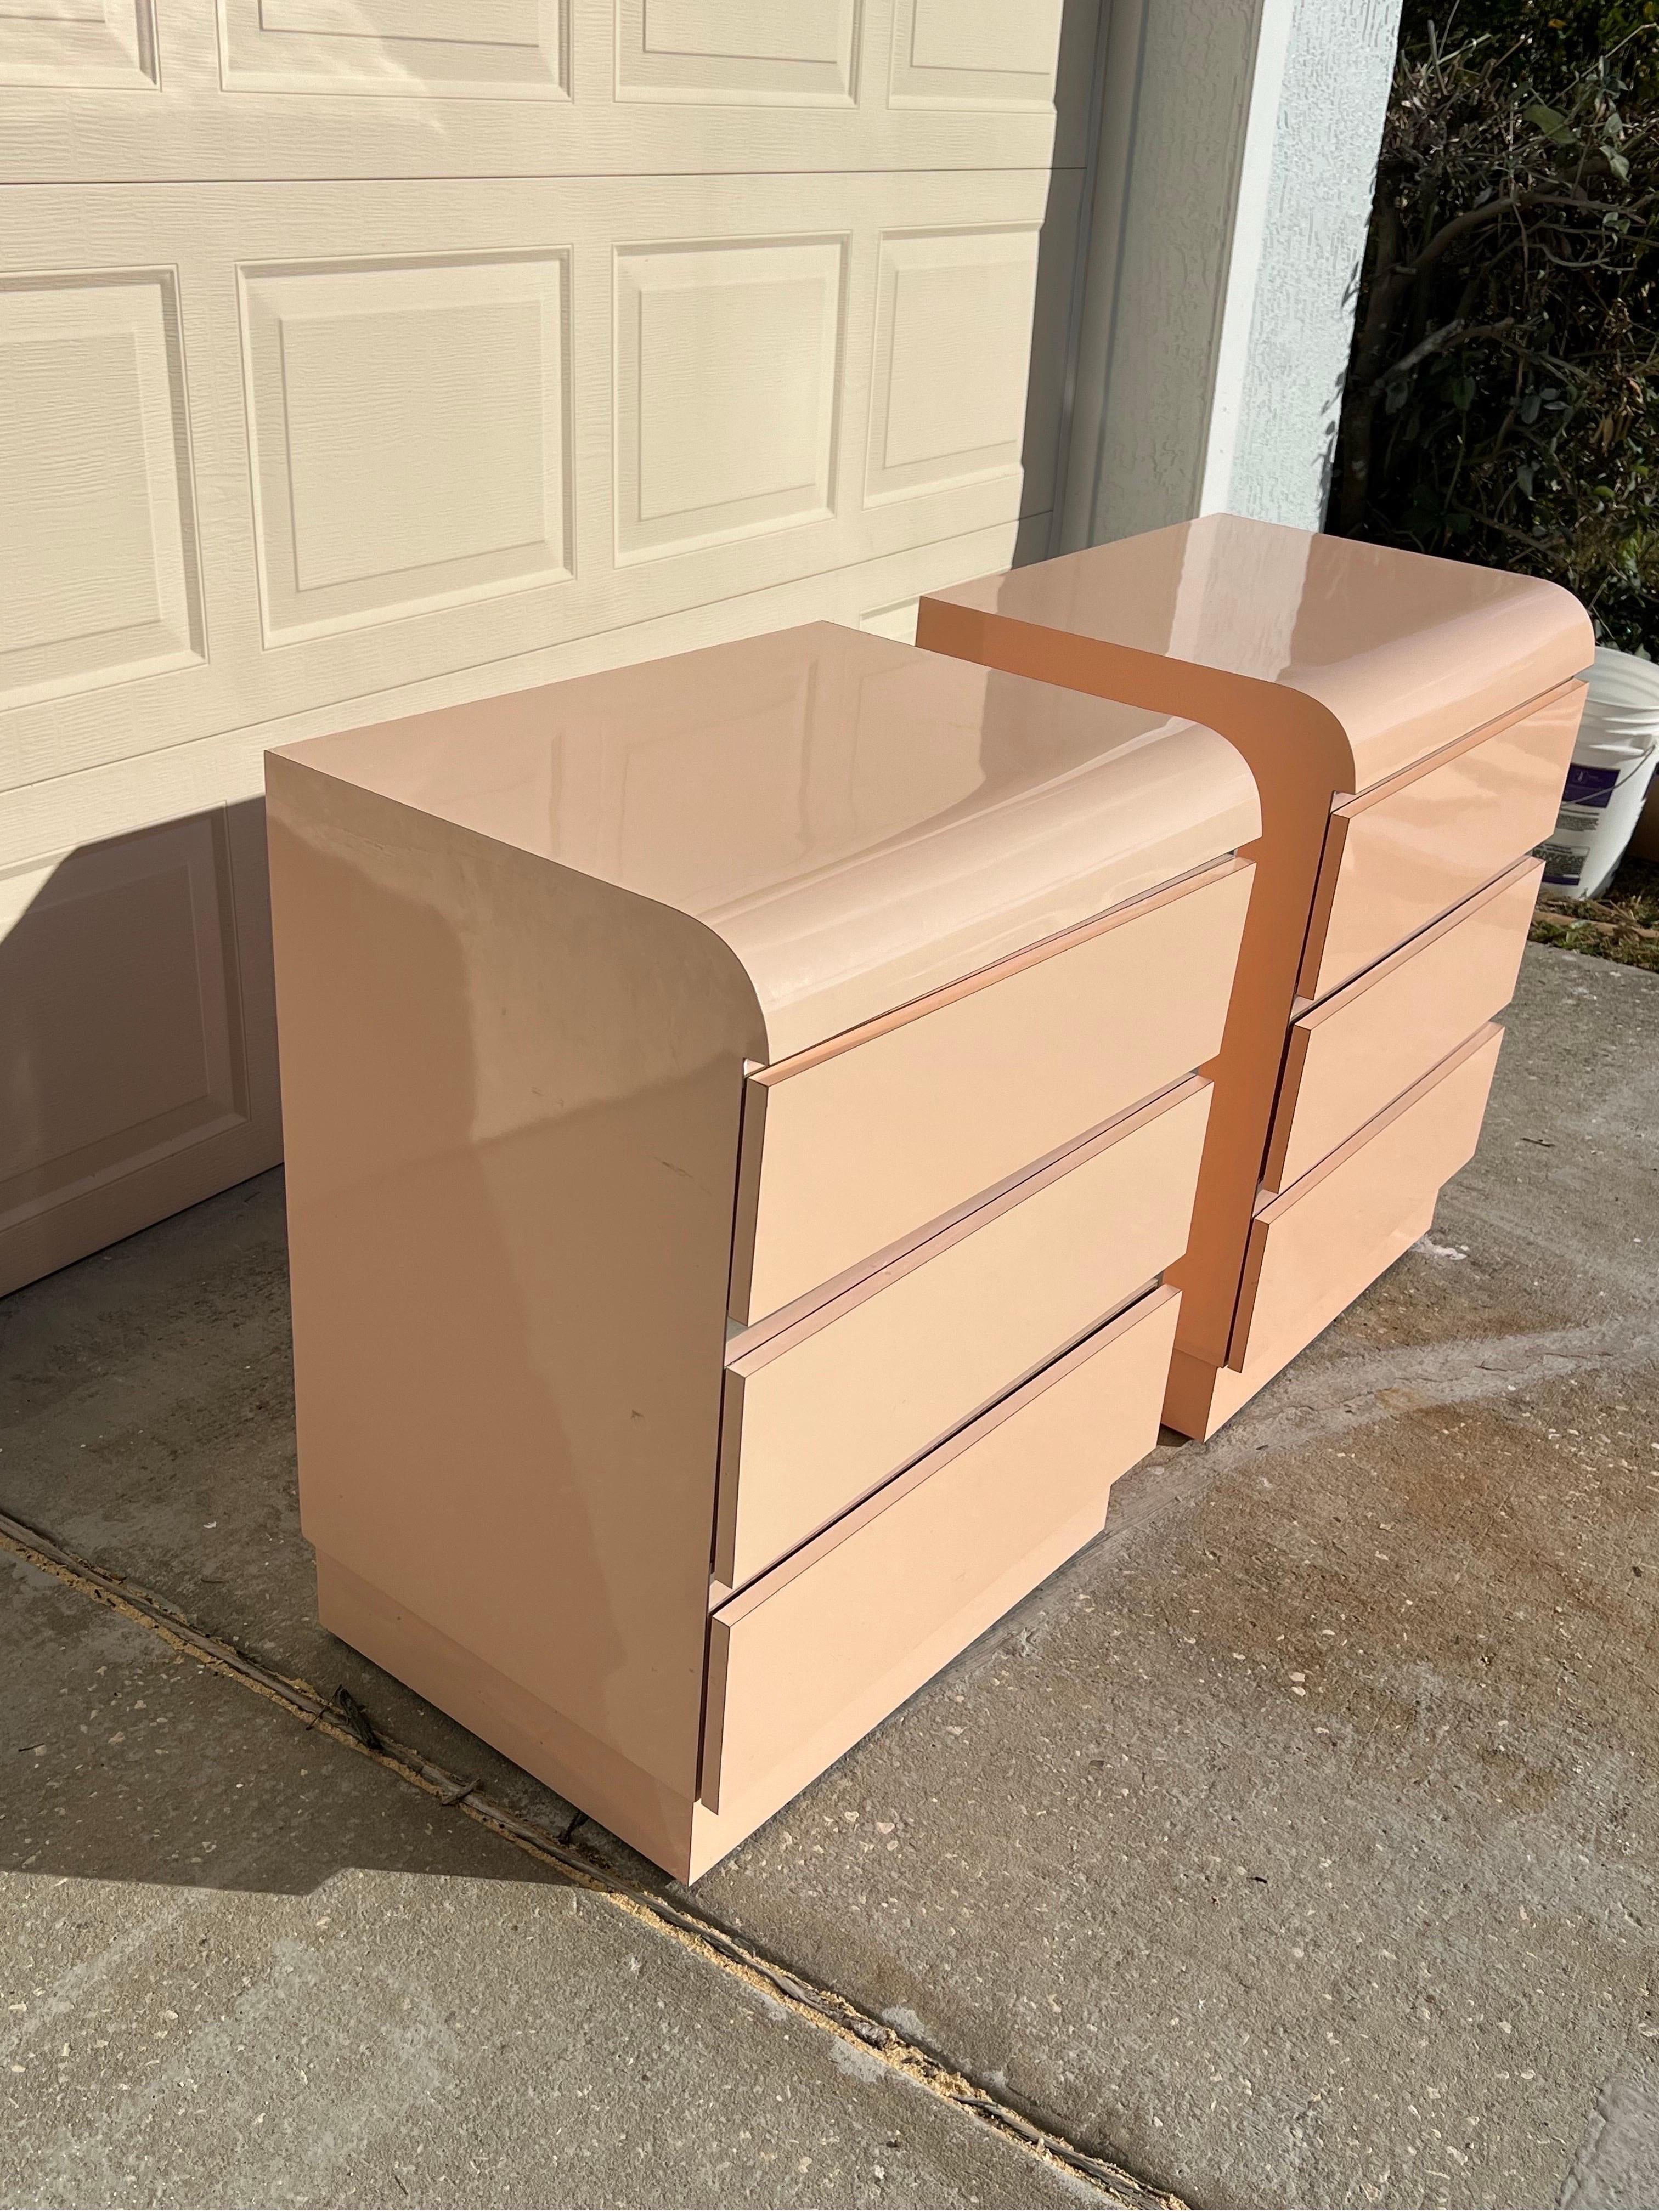 Post-Modern 1980 Laminate Pink Nightstands With Chrome Trim - a Pair For Sale